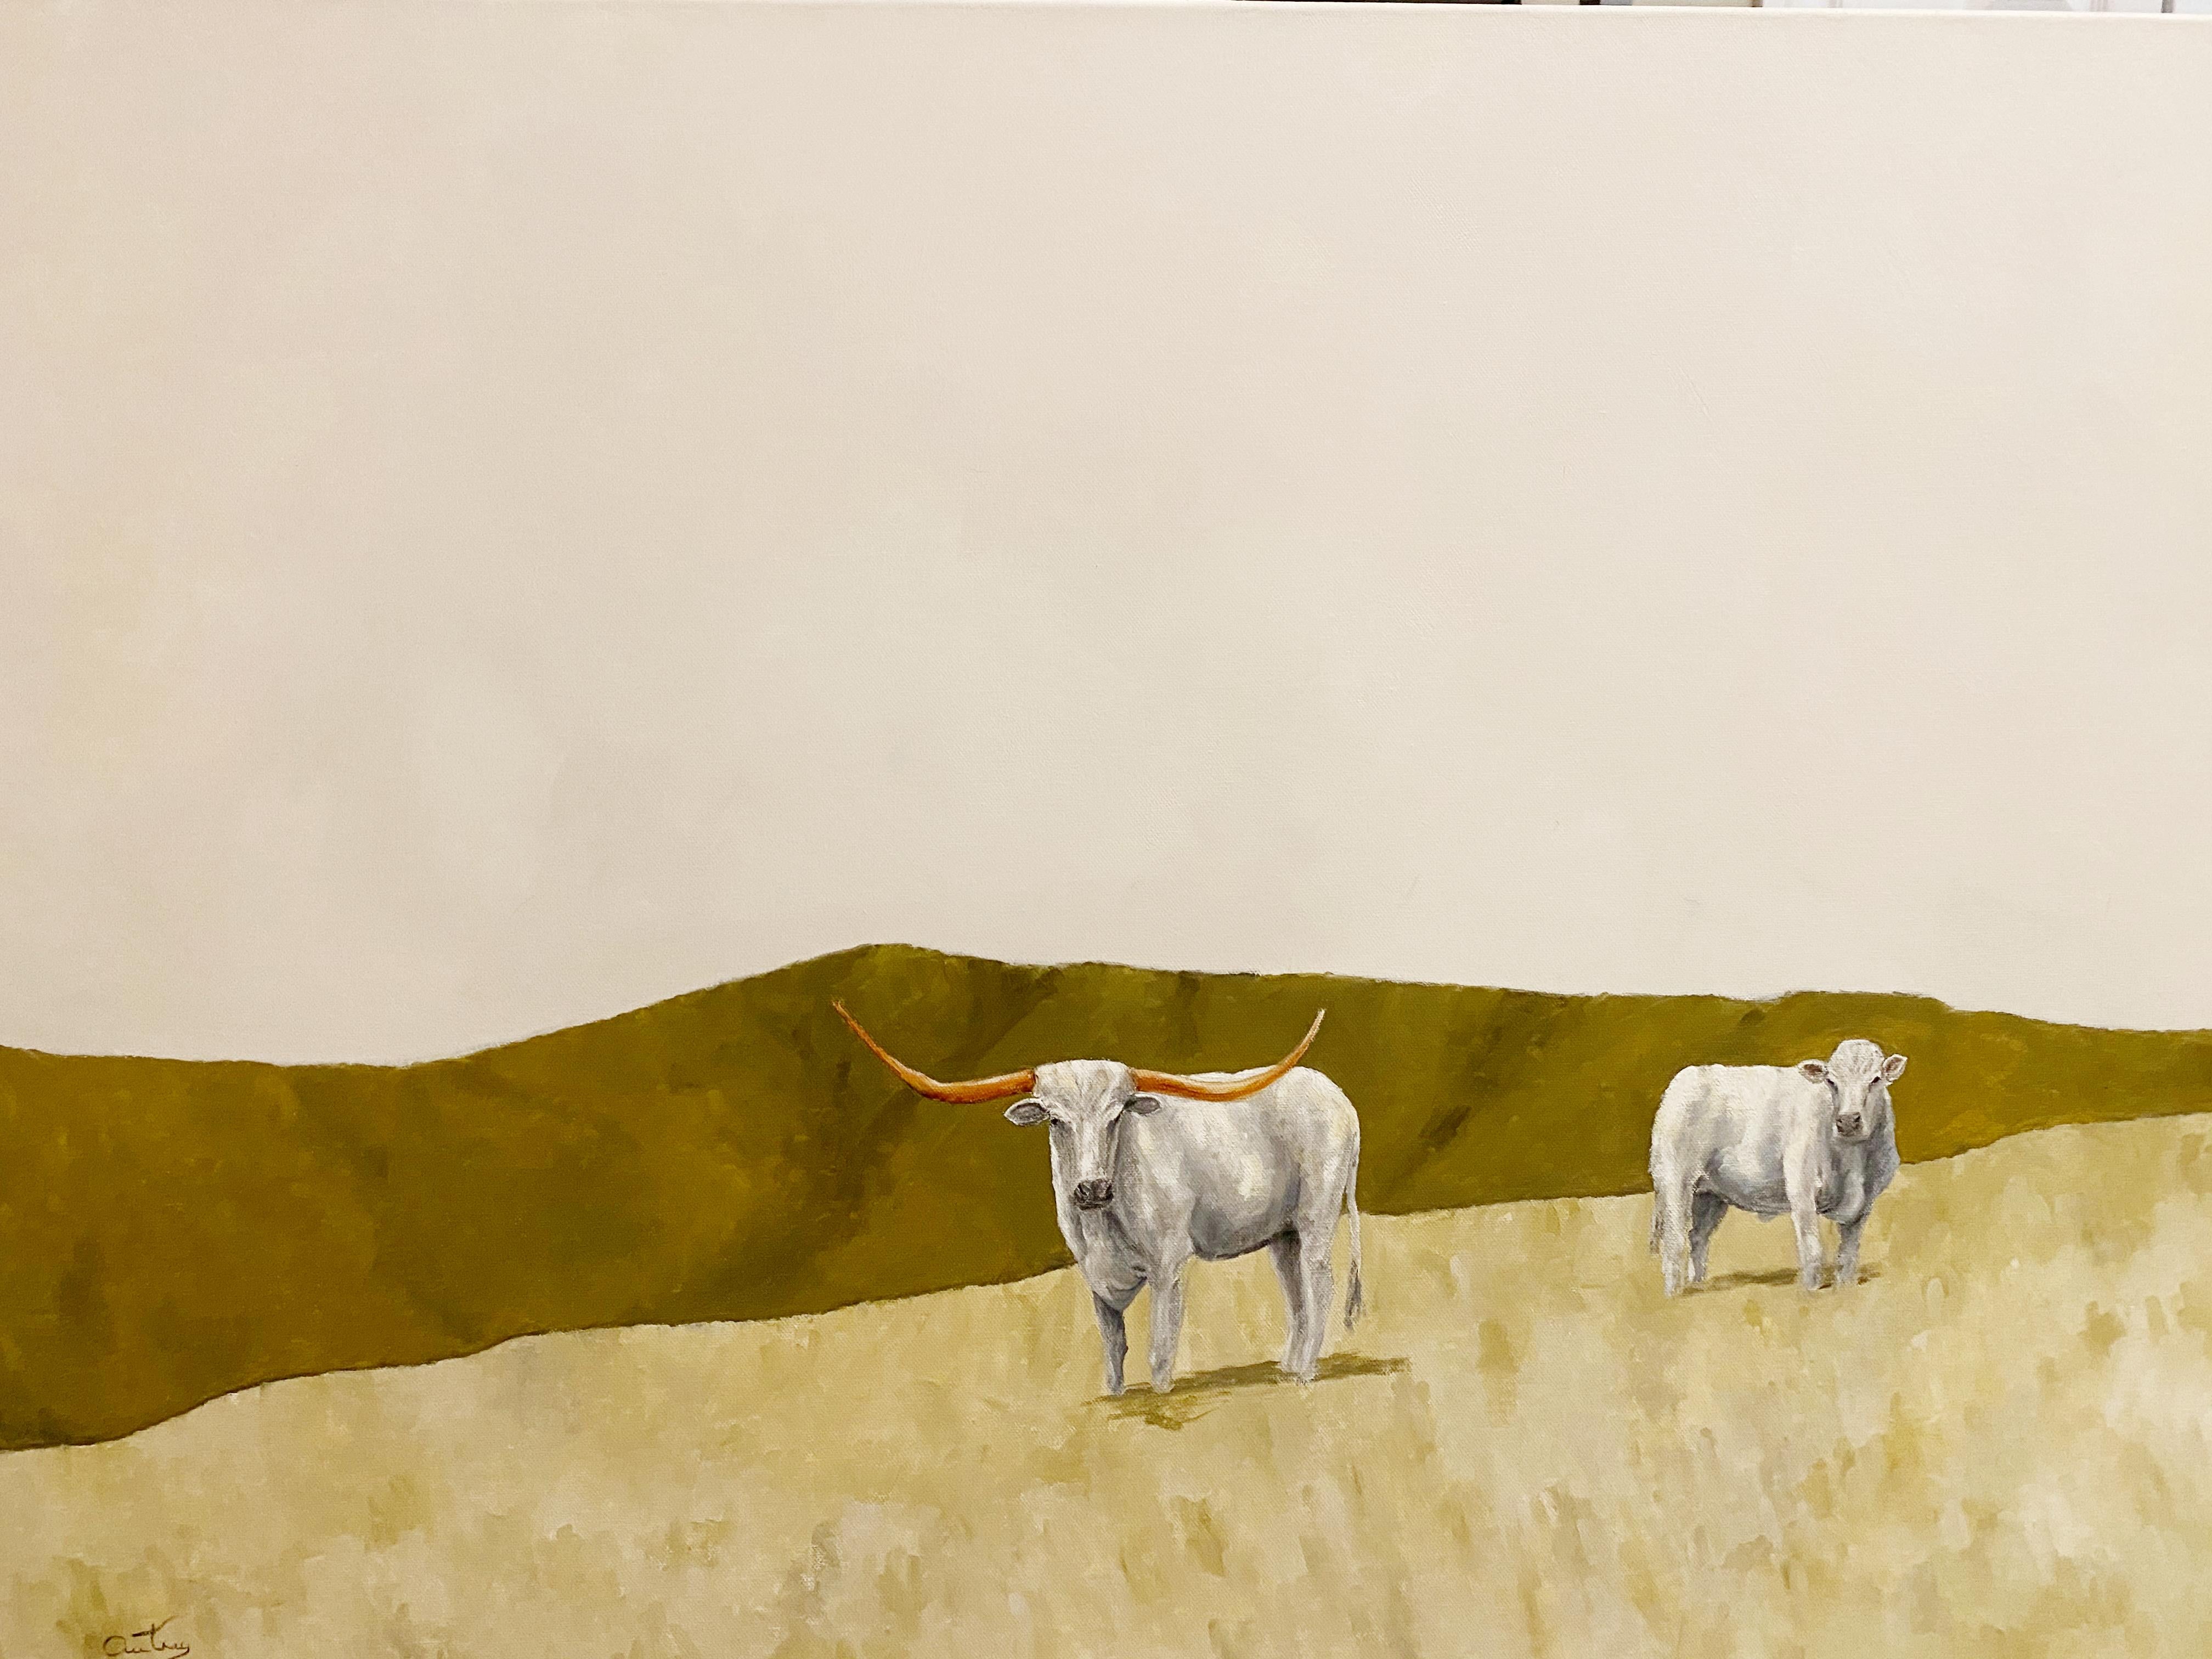 Luke Autrey Animal Painting - Green Pasture, Texas Artist, Realist, Light and Shadow, Texas Cattle, Rodeo